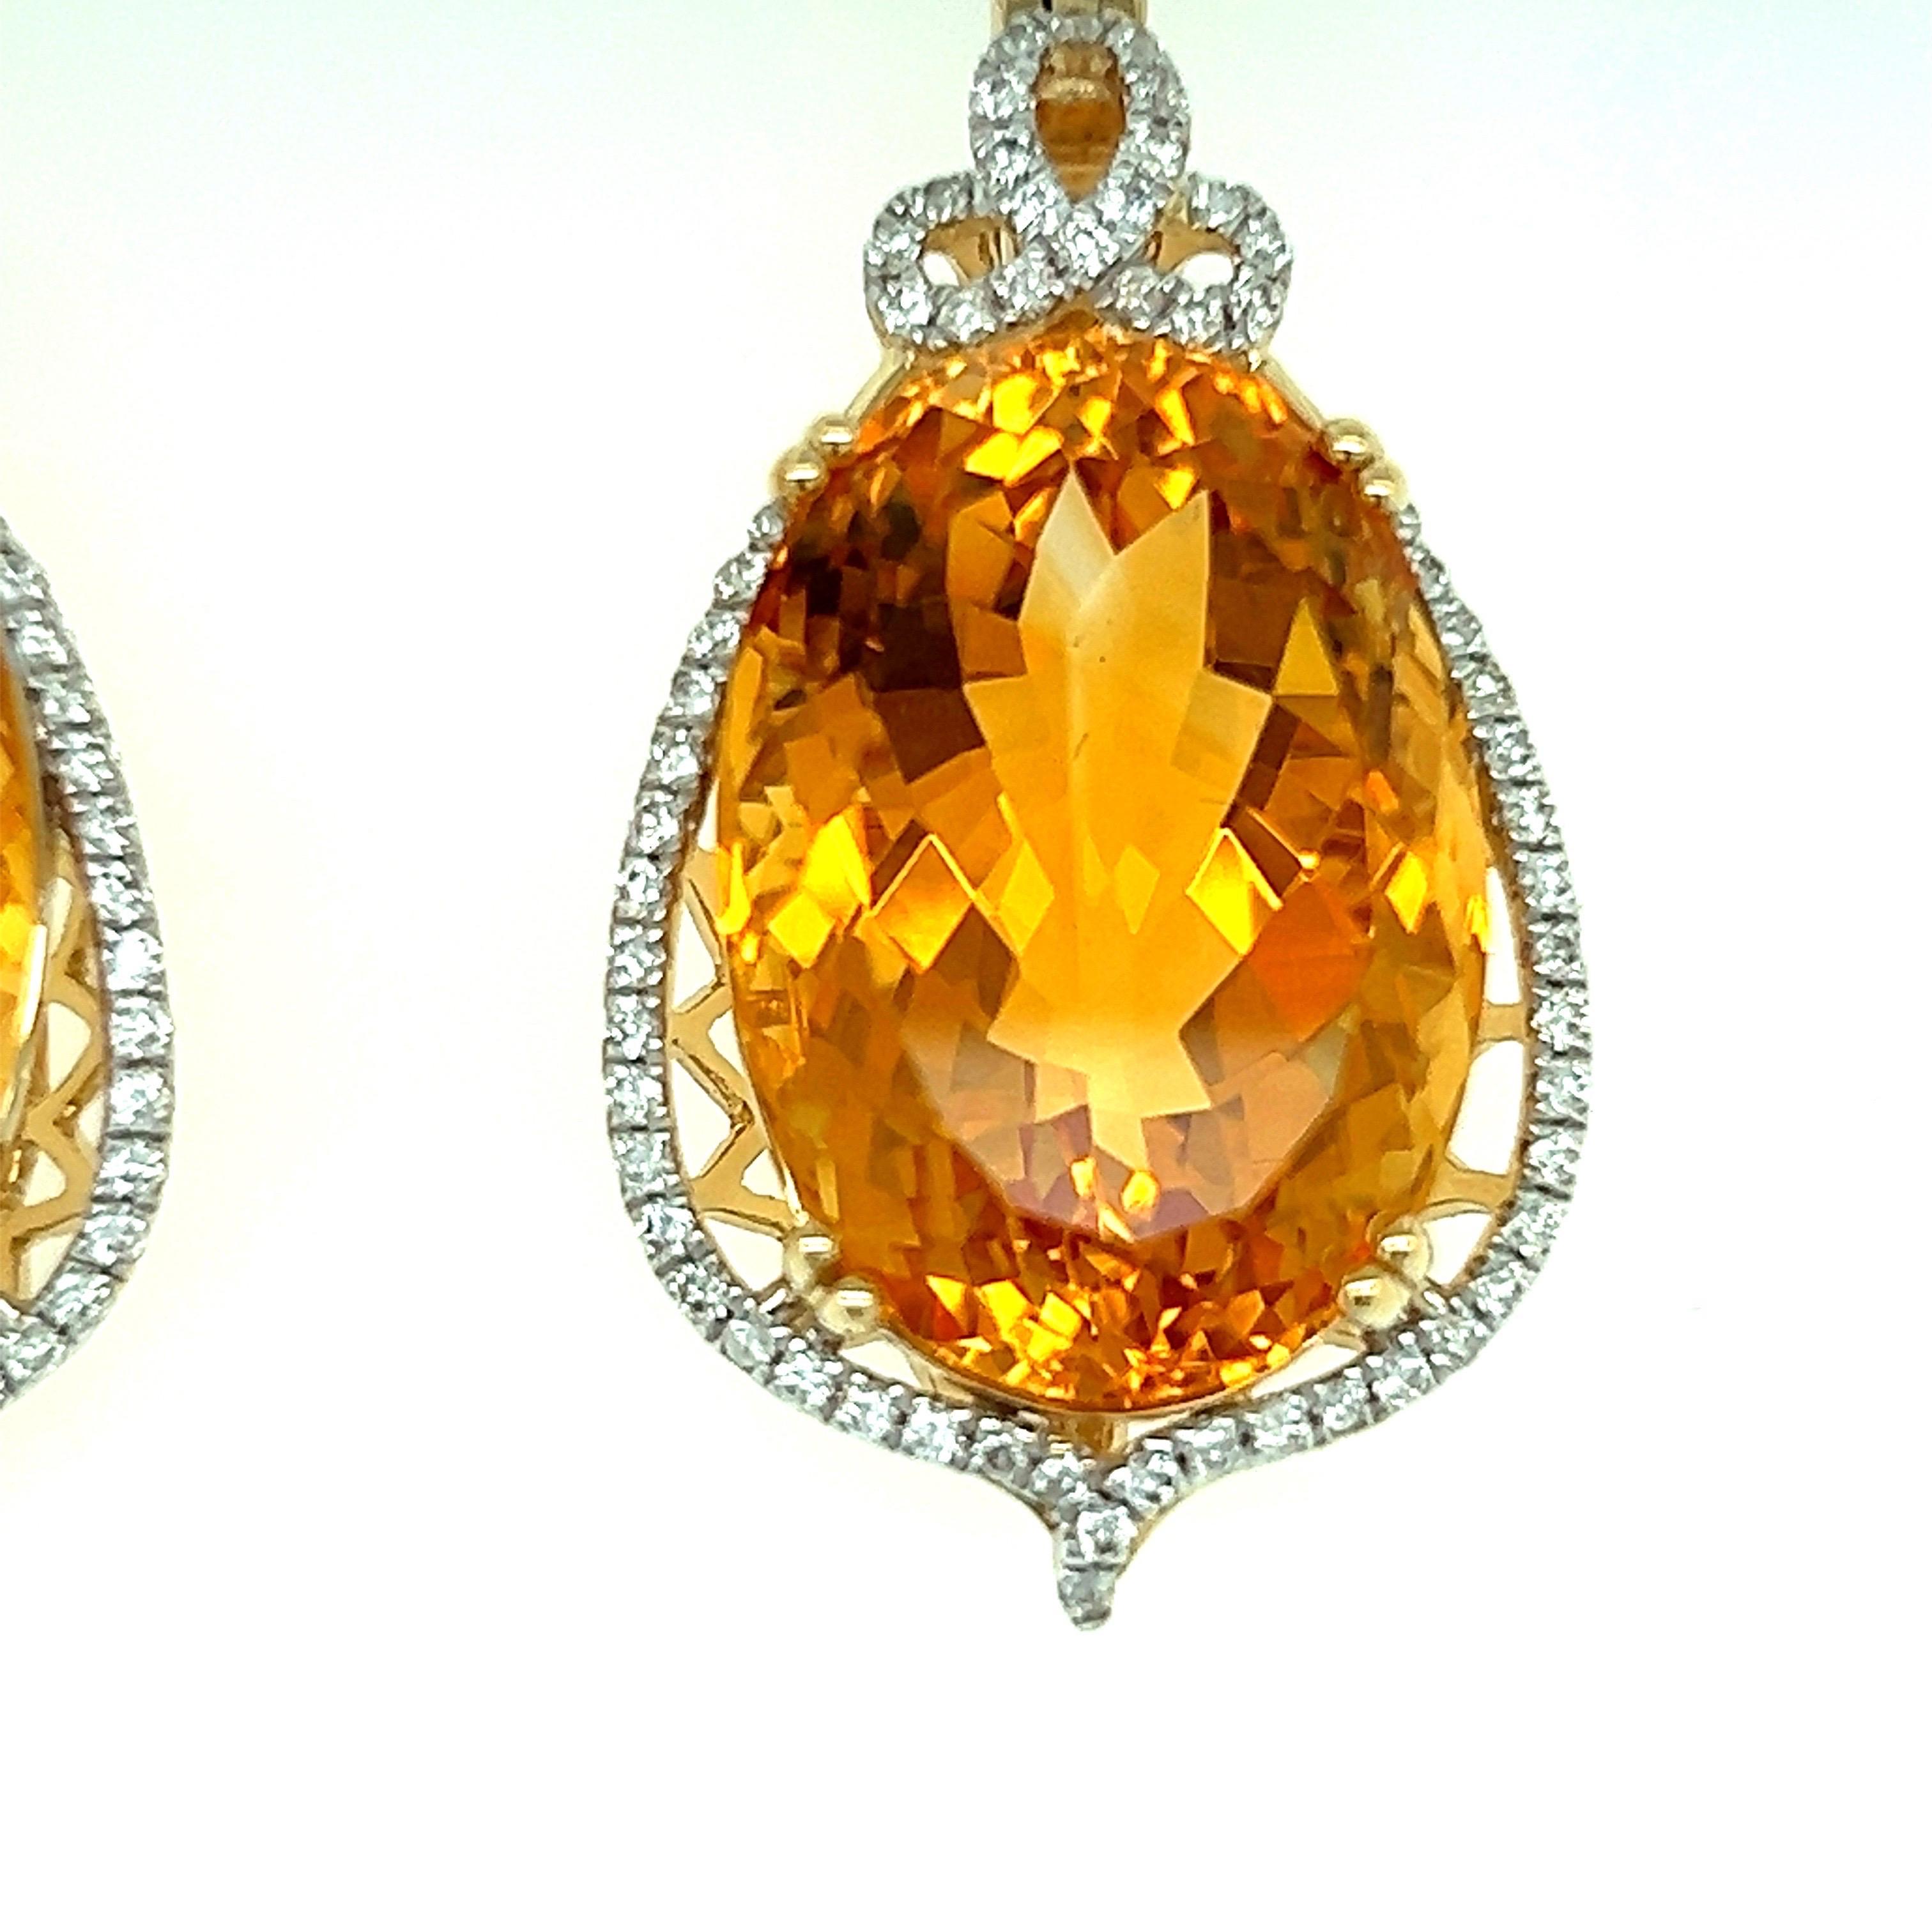 Elegant design. High brilliance, rich golden honey tone, oval faceted, matching natural 33.25 carats citrines mounted in high profile open basket with eight bead prongs, accented with round brilliant cut diamonds. Handcrafted master piece design set